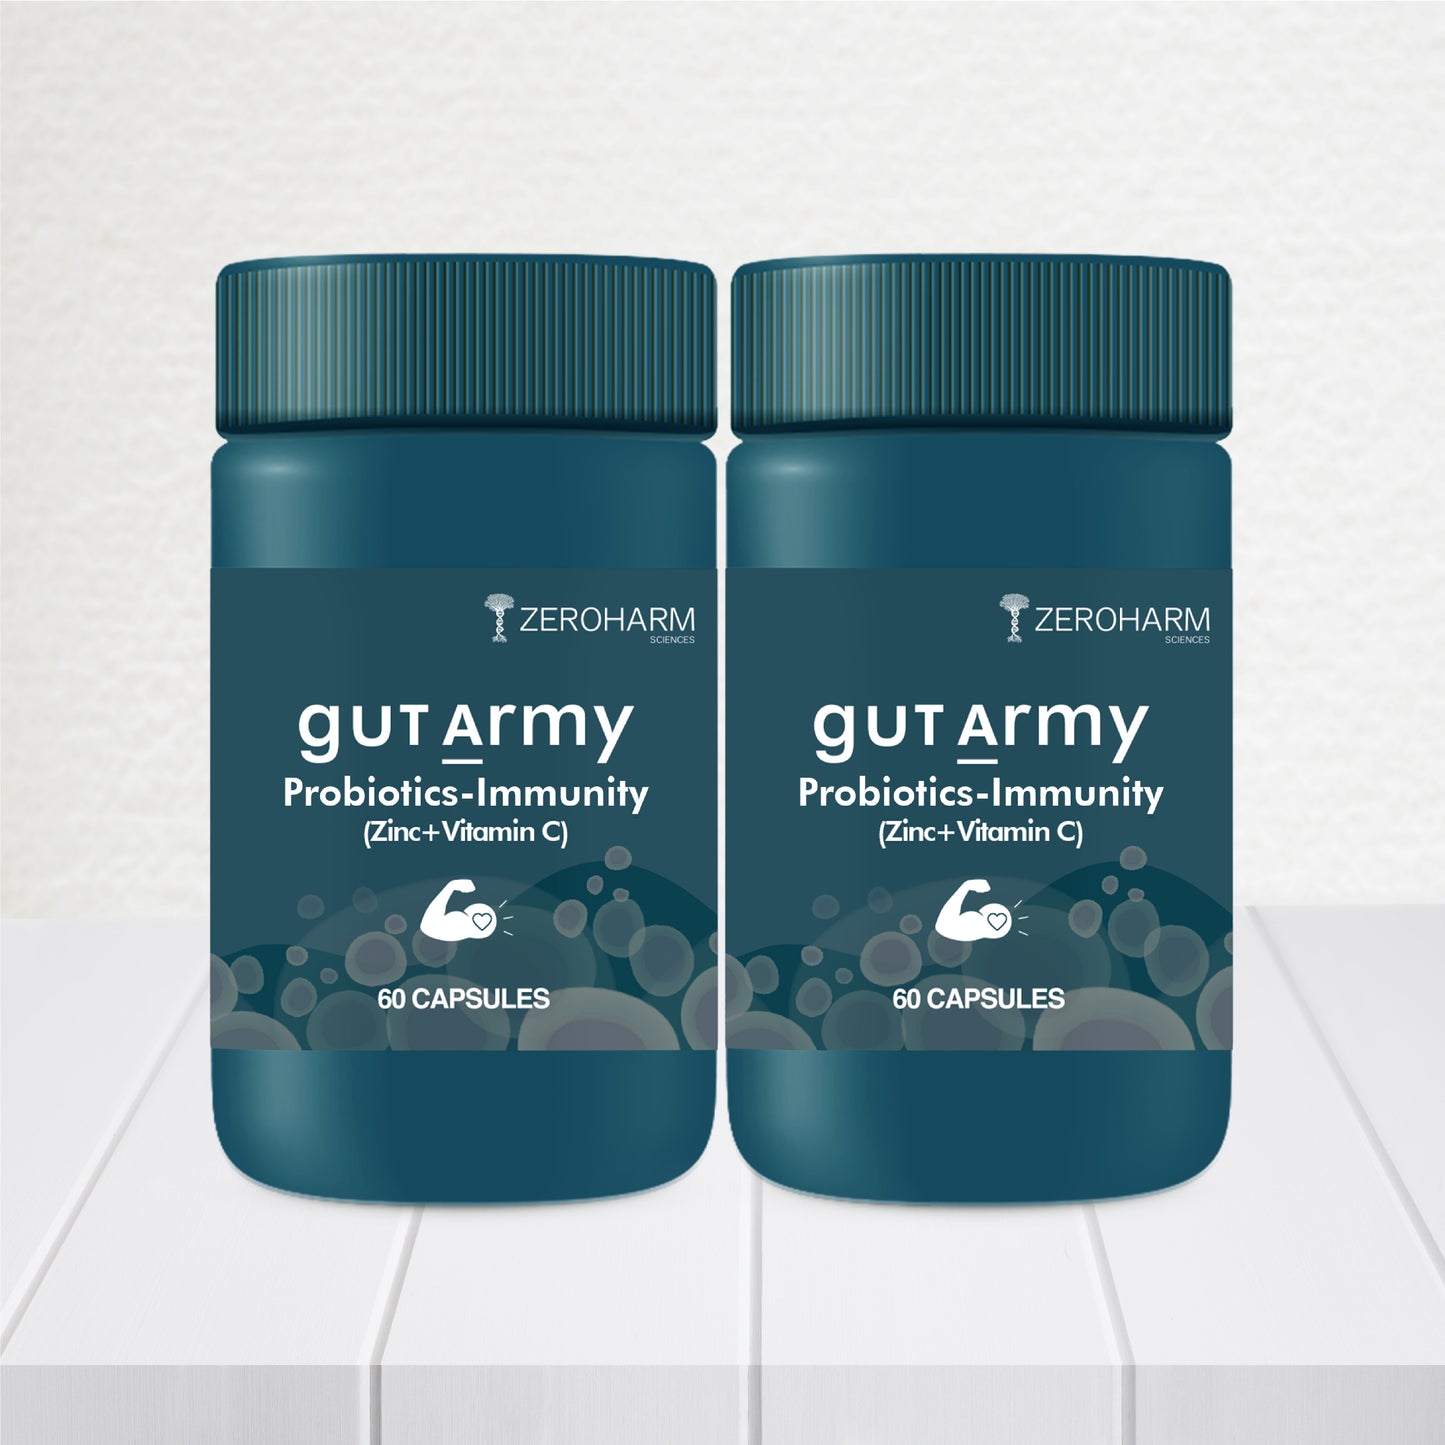 Gut Army Probiotic Immunity Booster